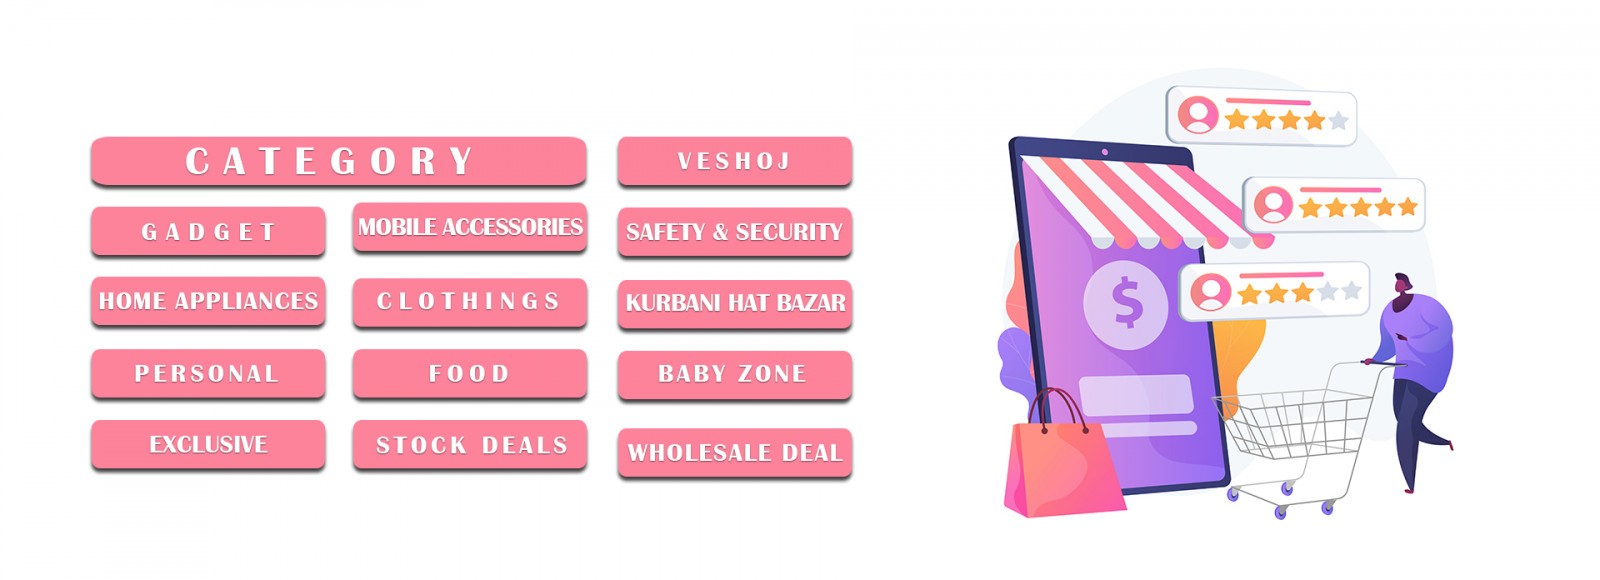 Baby Zone | Category | B Bazar | A Big Online Market Place and Reseller Platform in Bangladesh